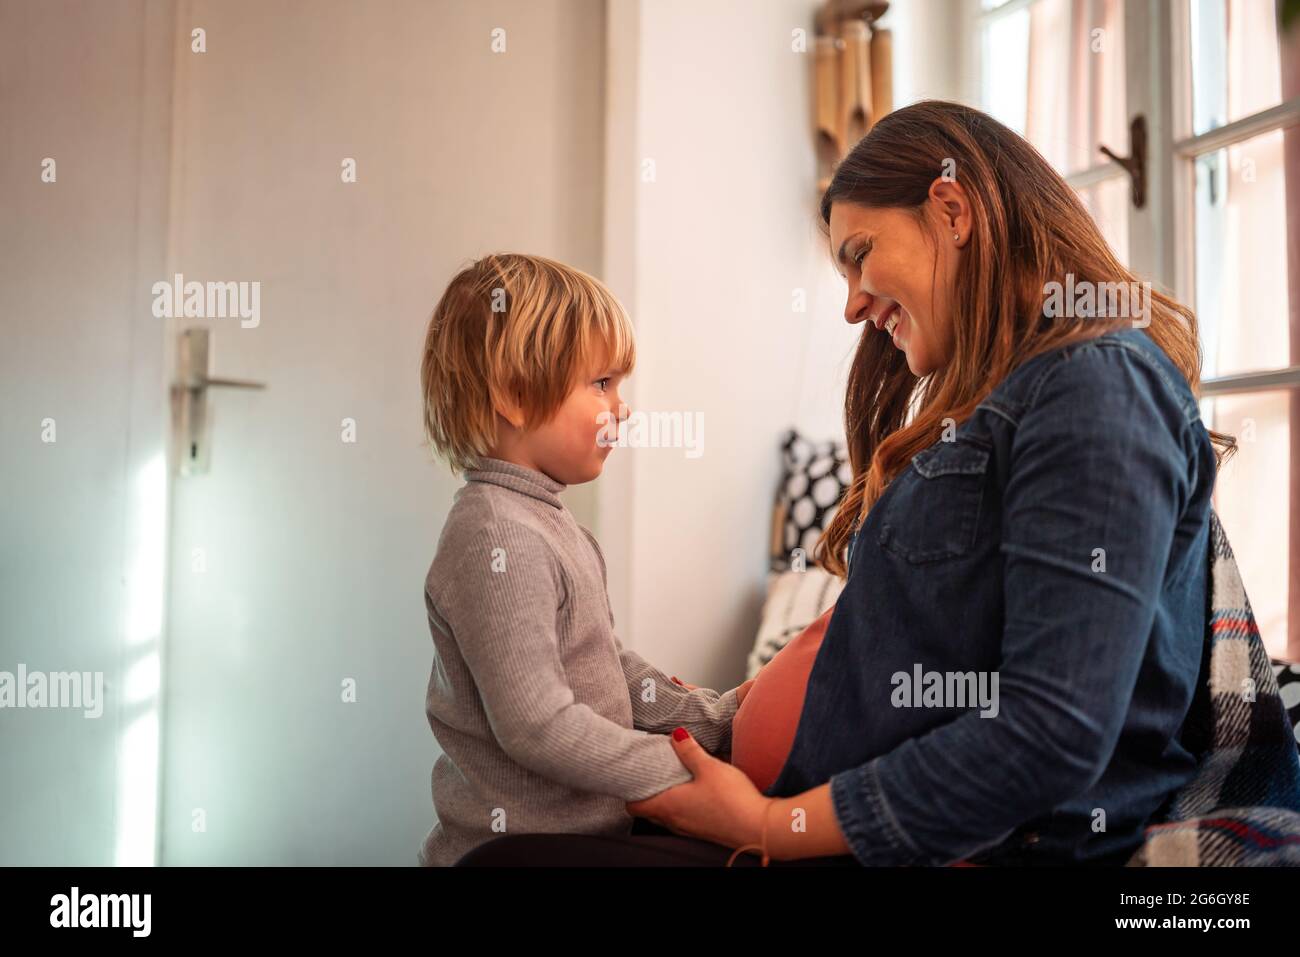 Happy child holding belly of pregnant woman. Family people love concept Stock Photo